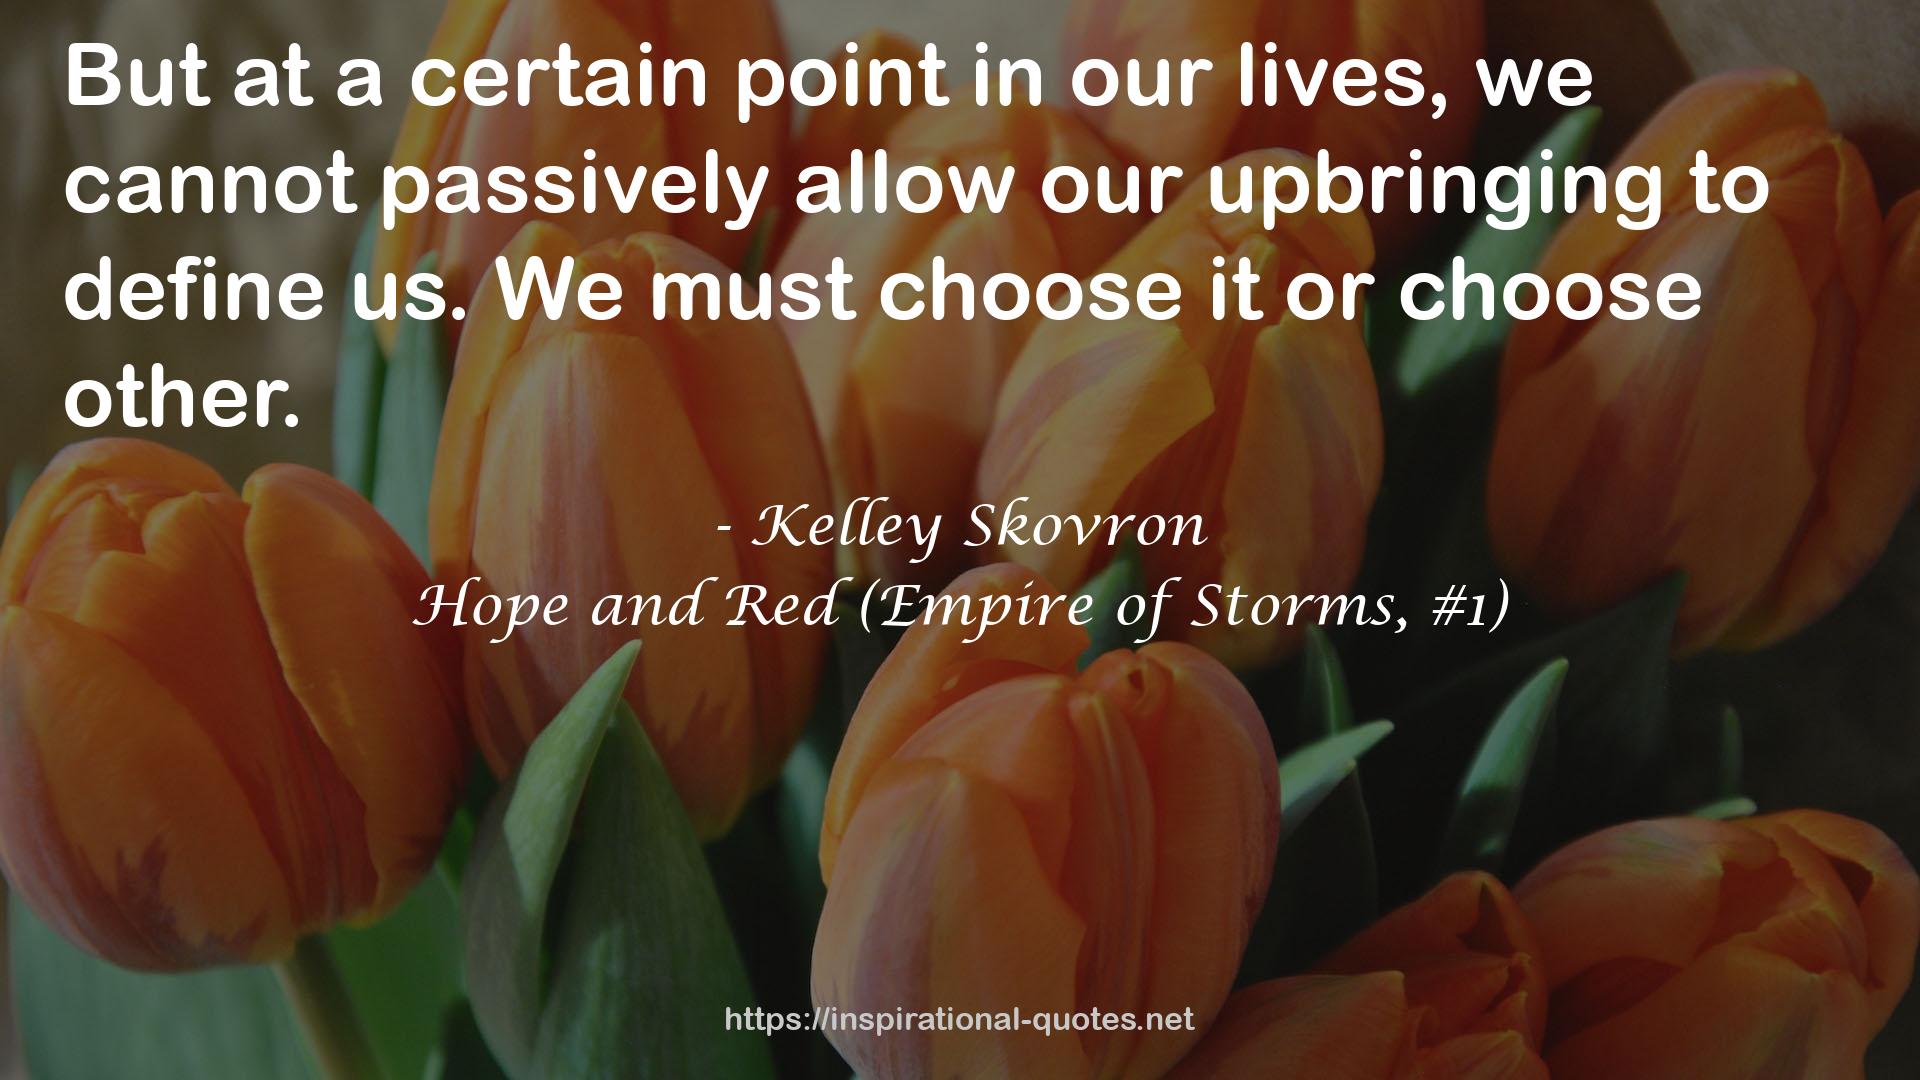 Hope and Red (Empire of Storms, #1) QUOTES